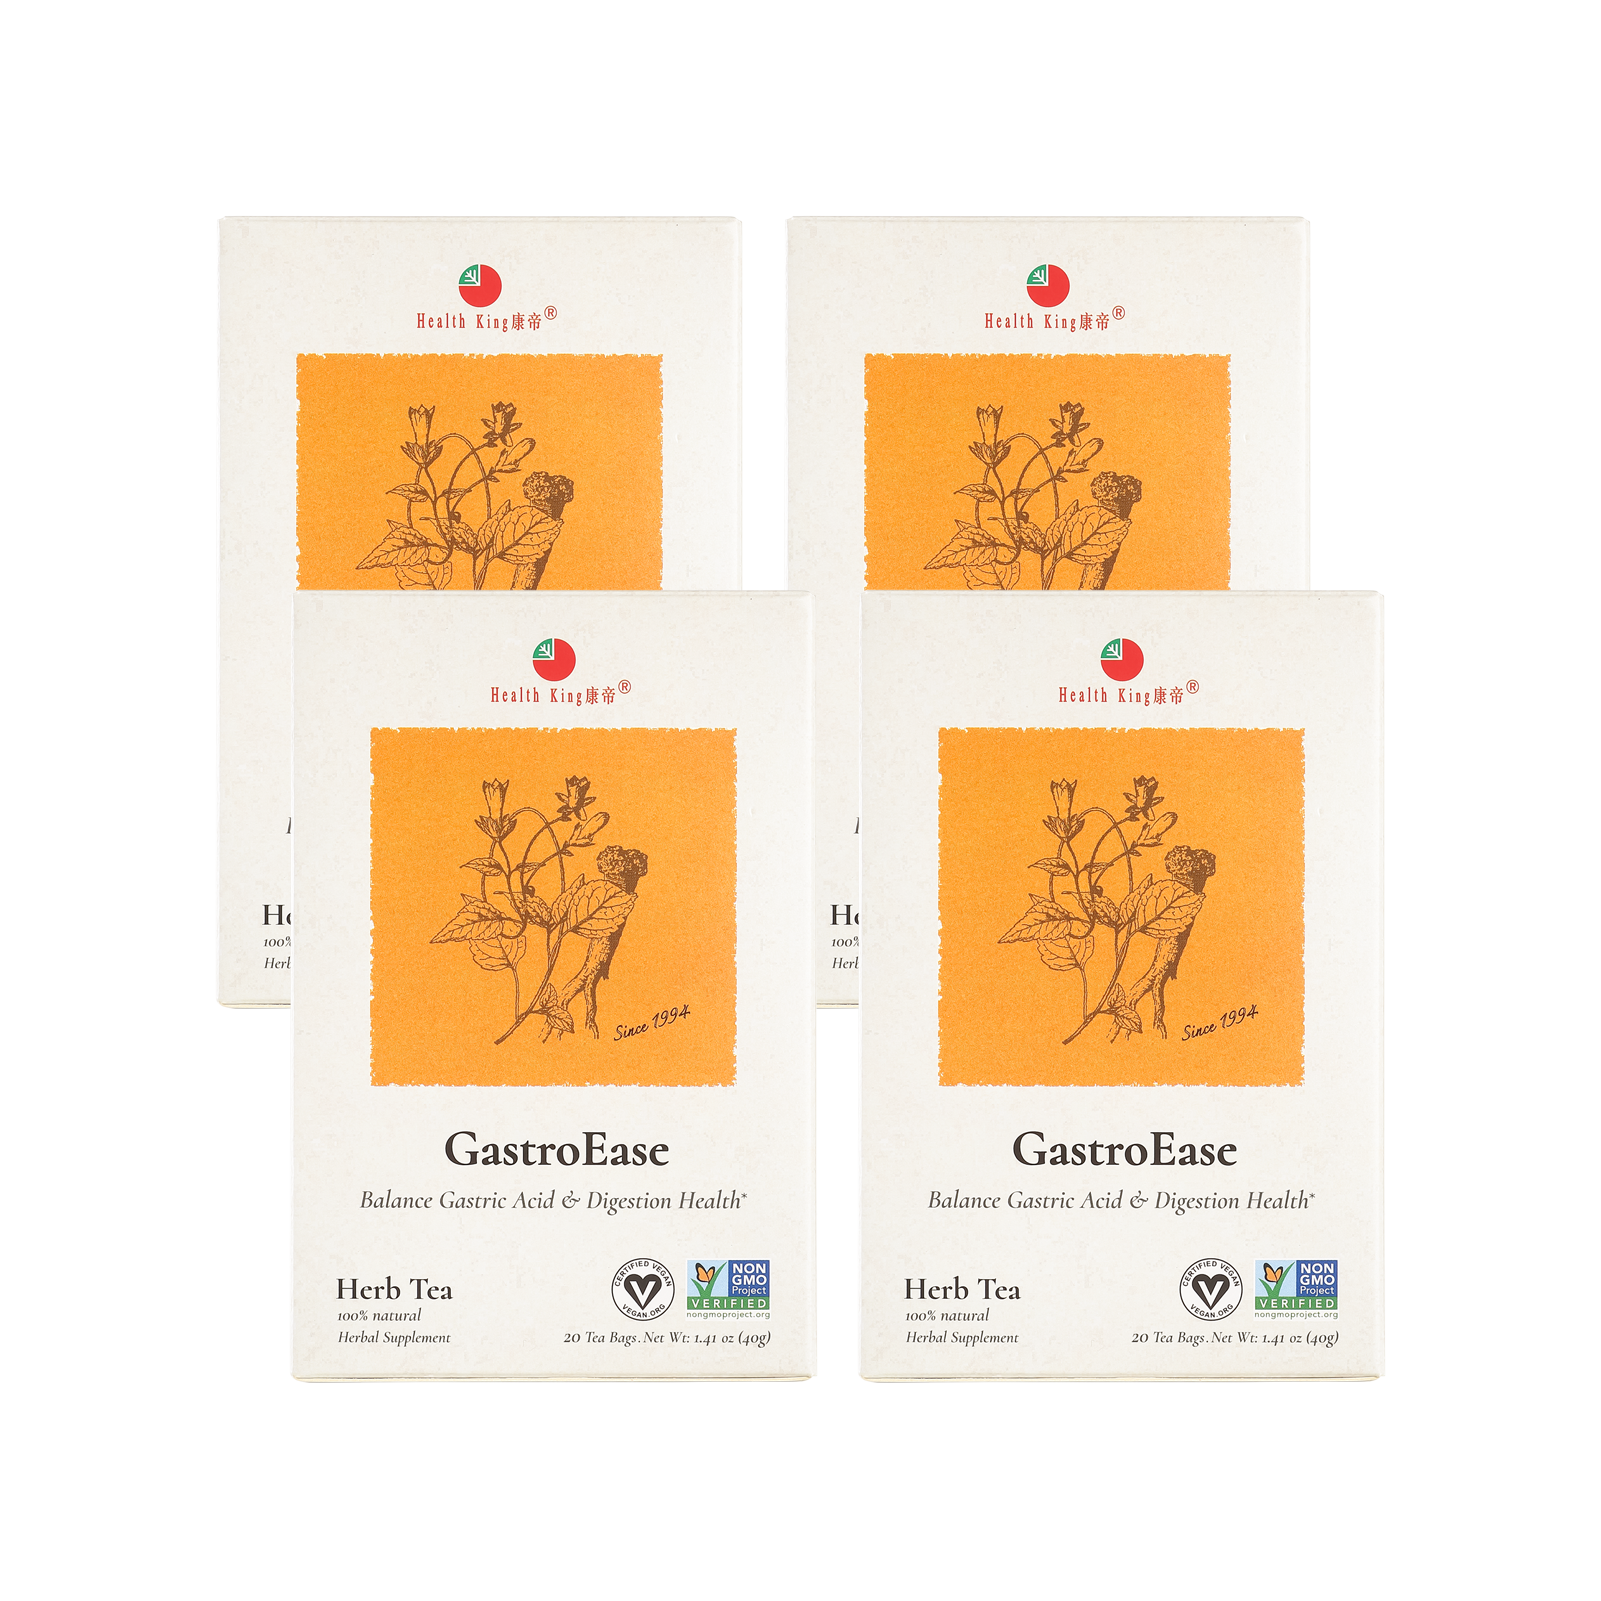 GastroEase Herb Tea package showcasing balance for gastric acid and digestion